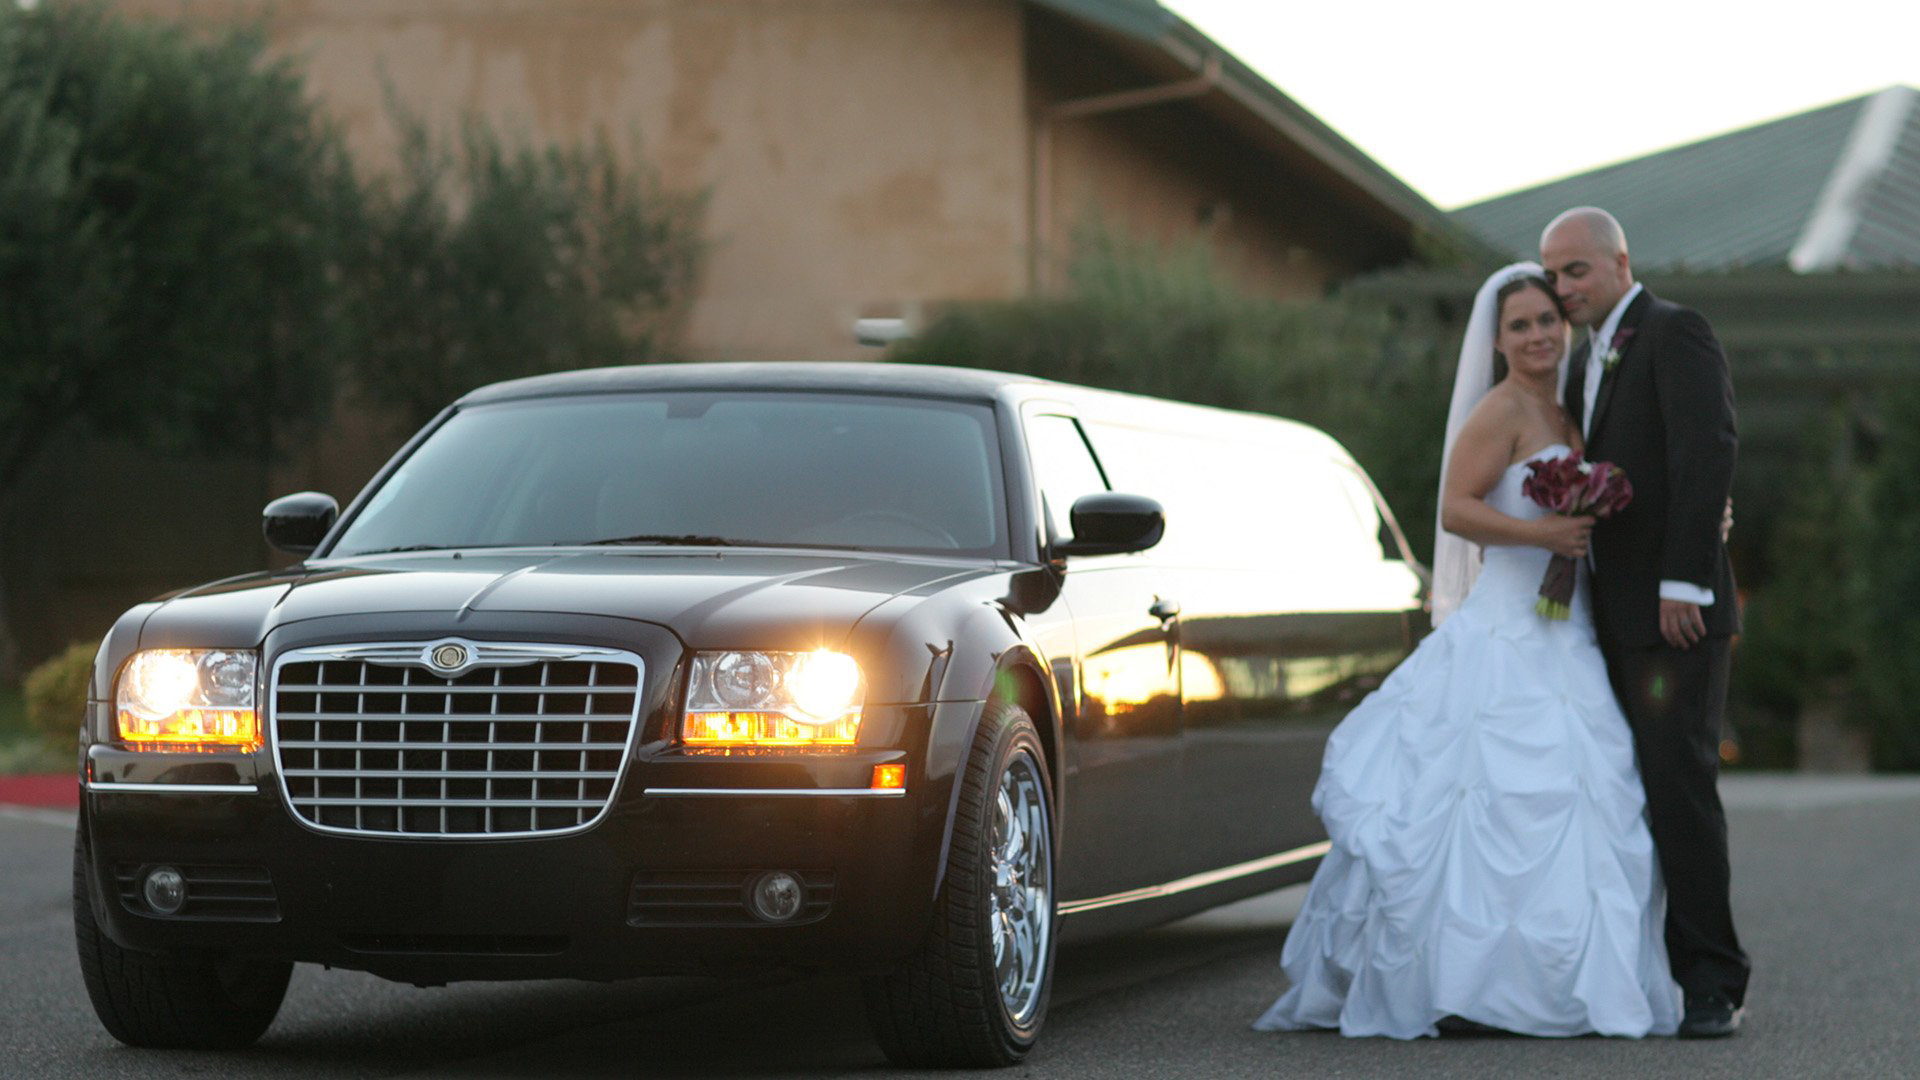 Wedding limo services